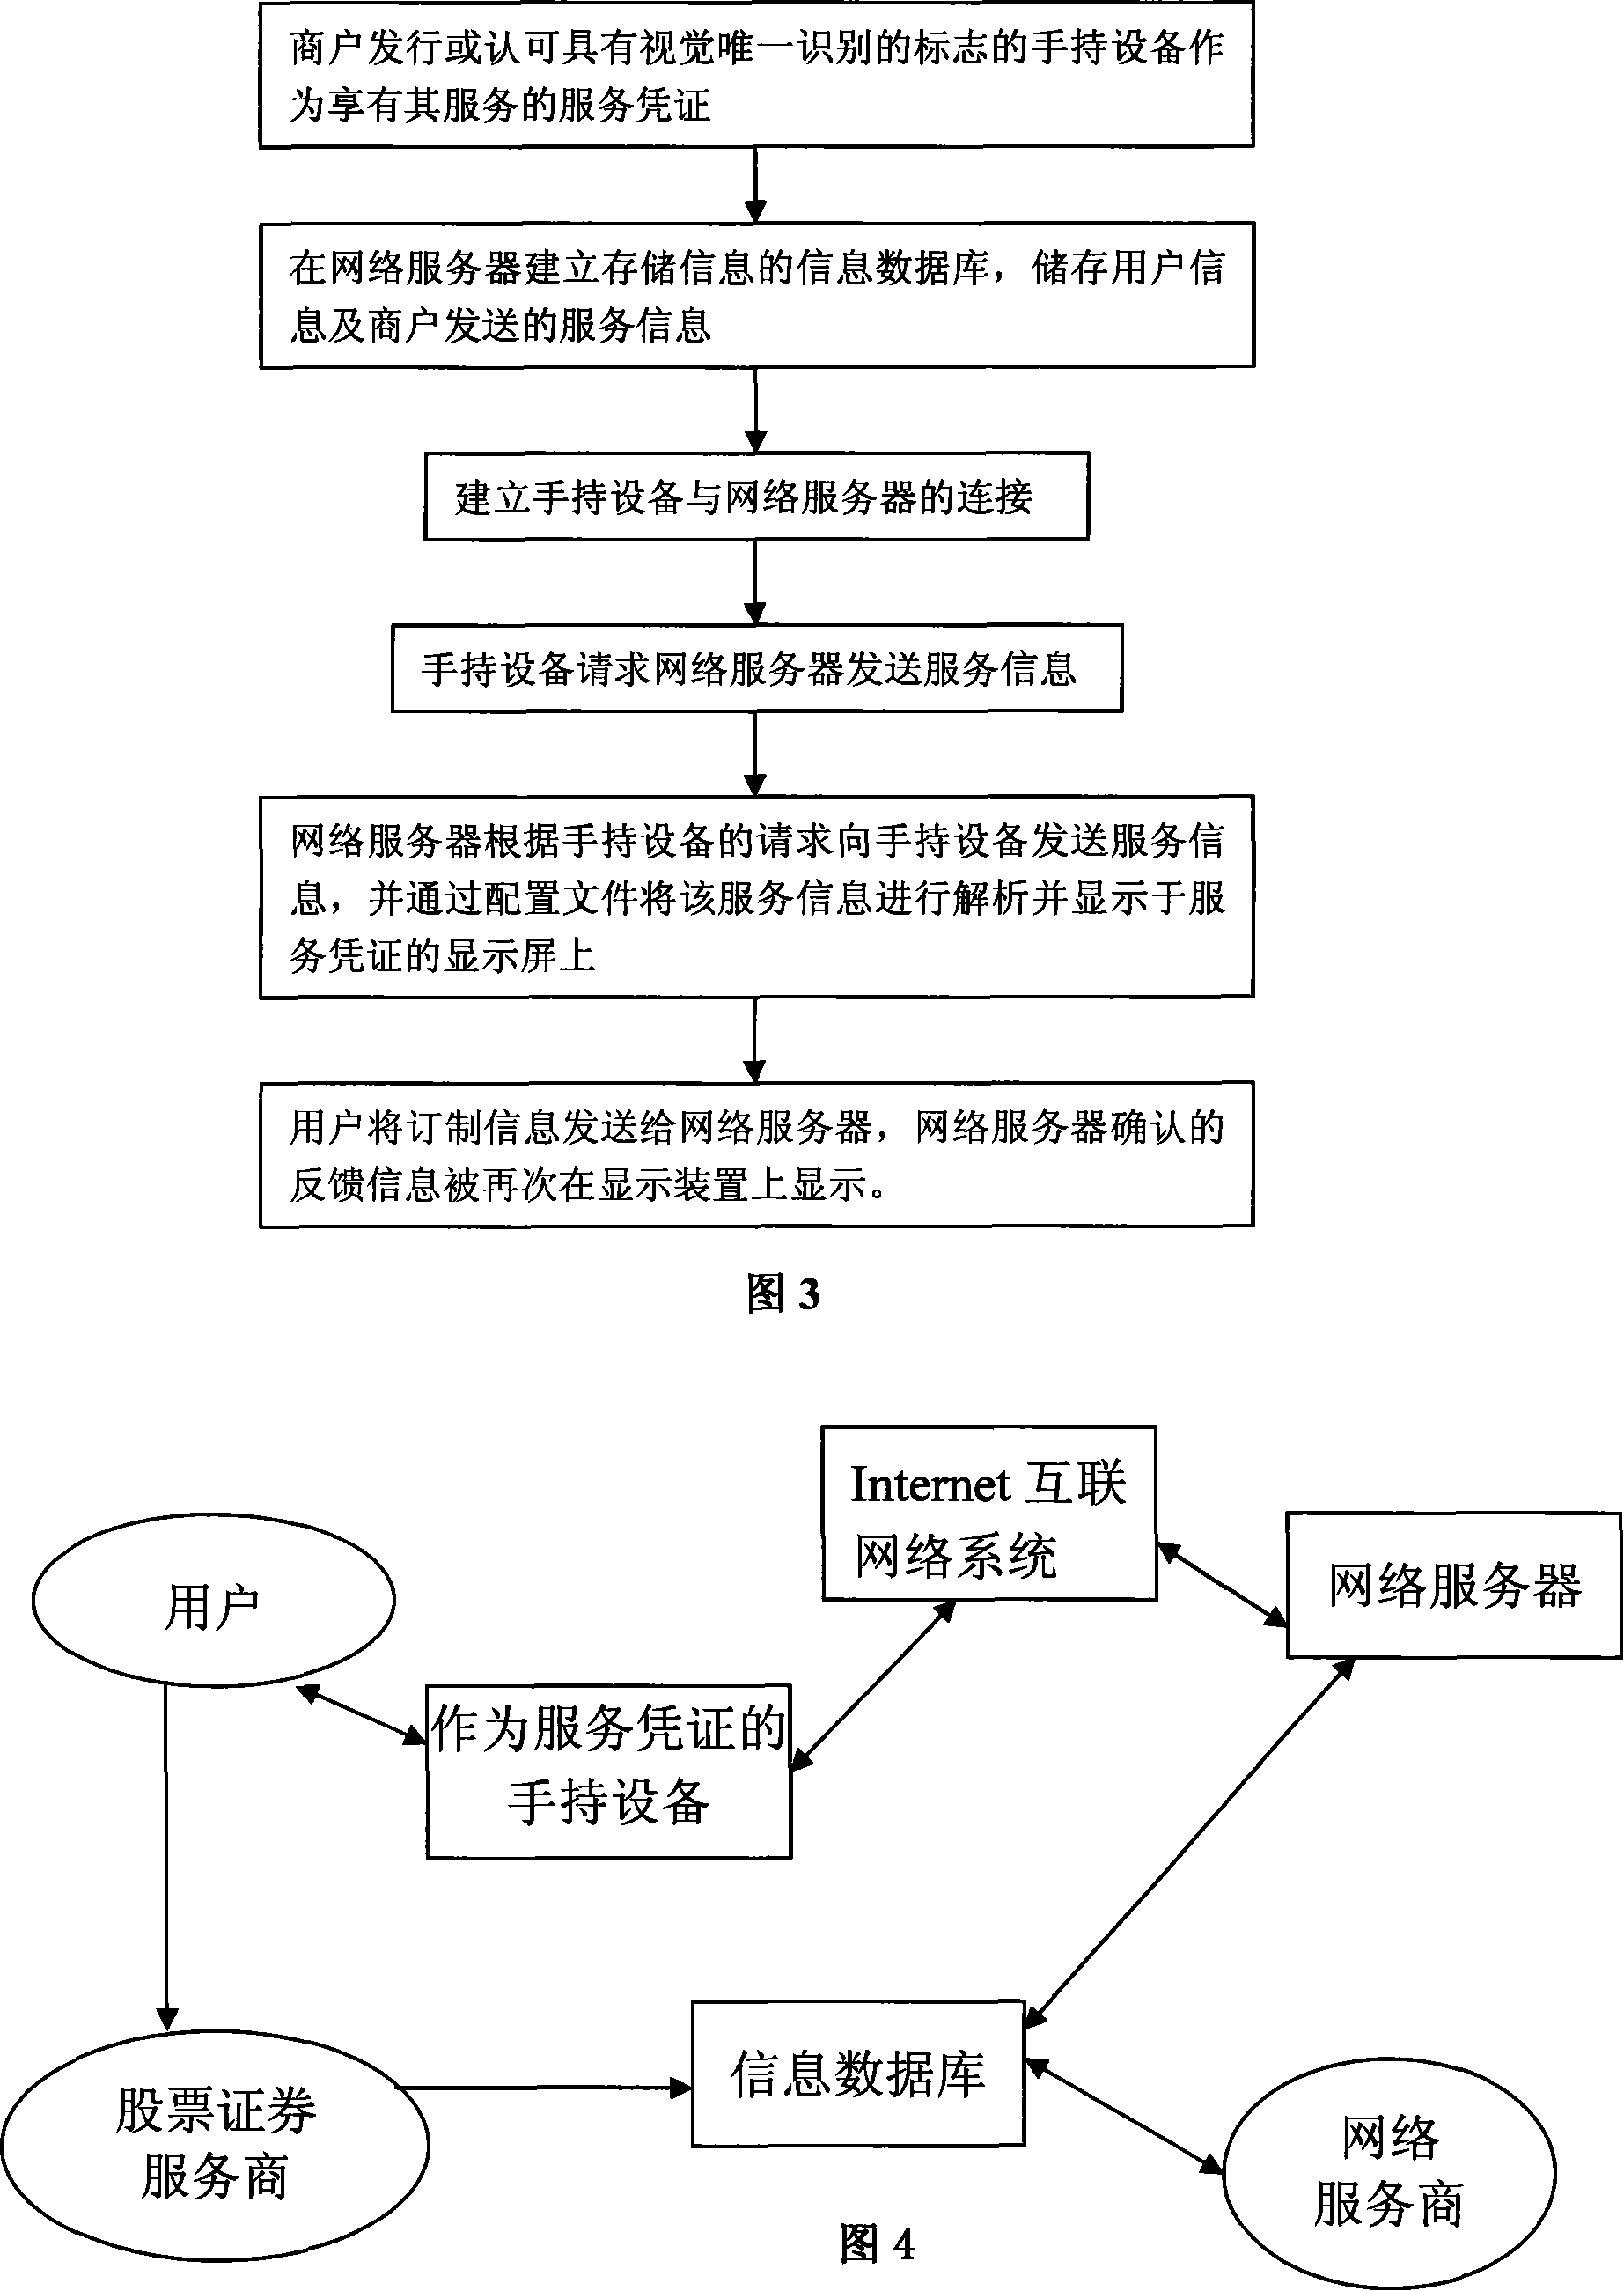 Voucher device and method and system for obtaining, subscribing network information using the same